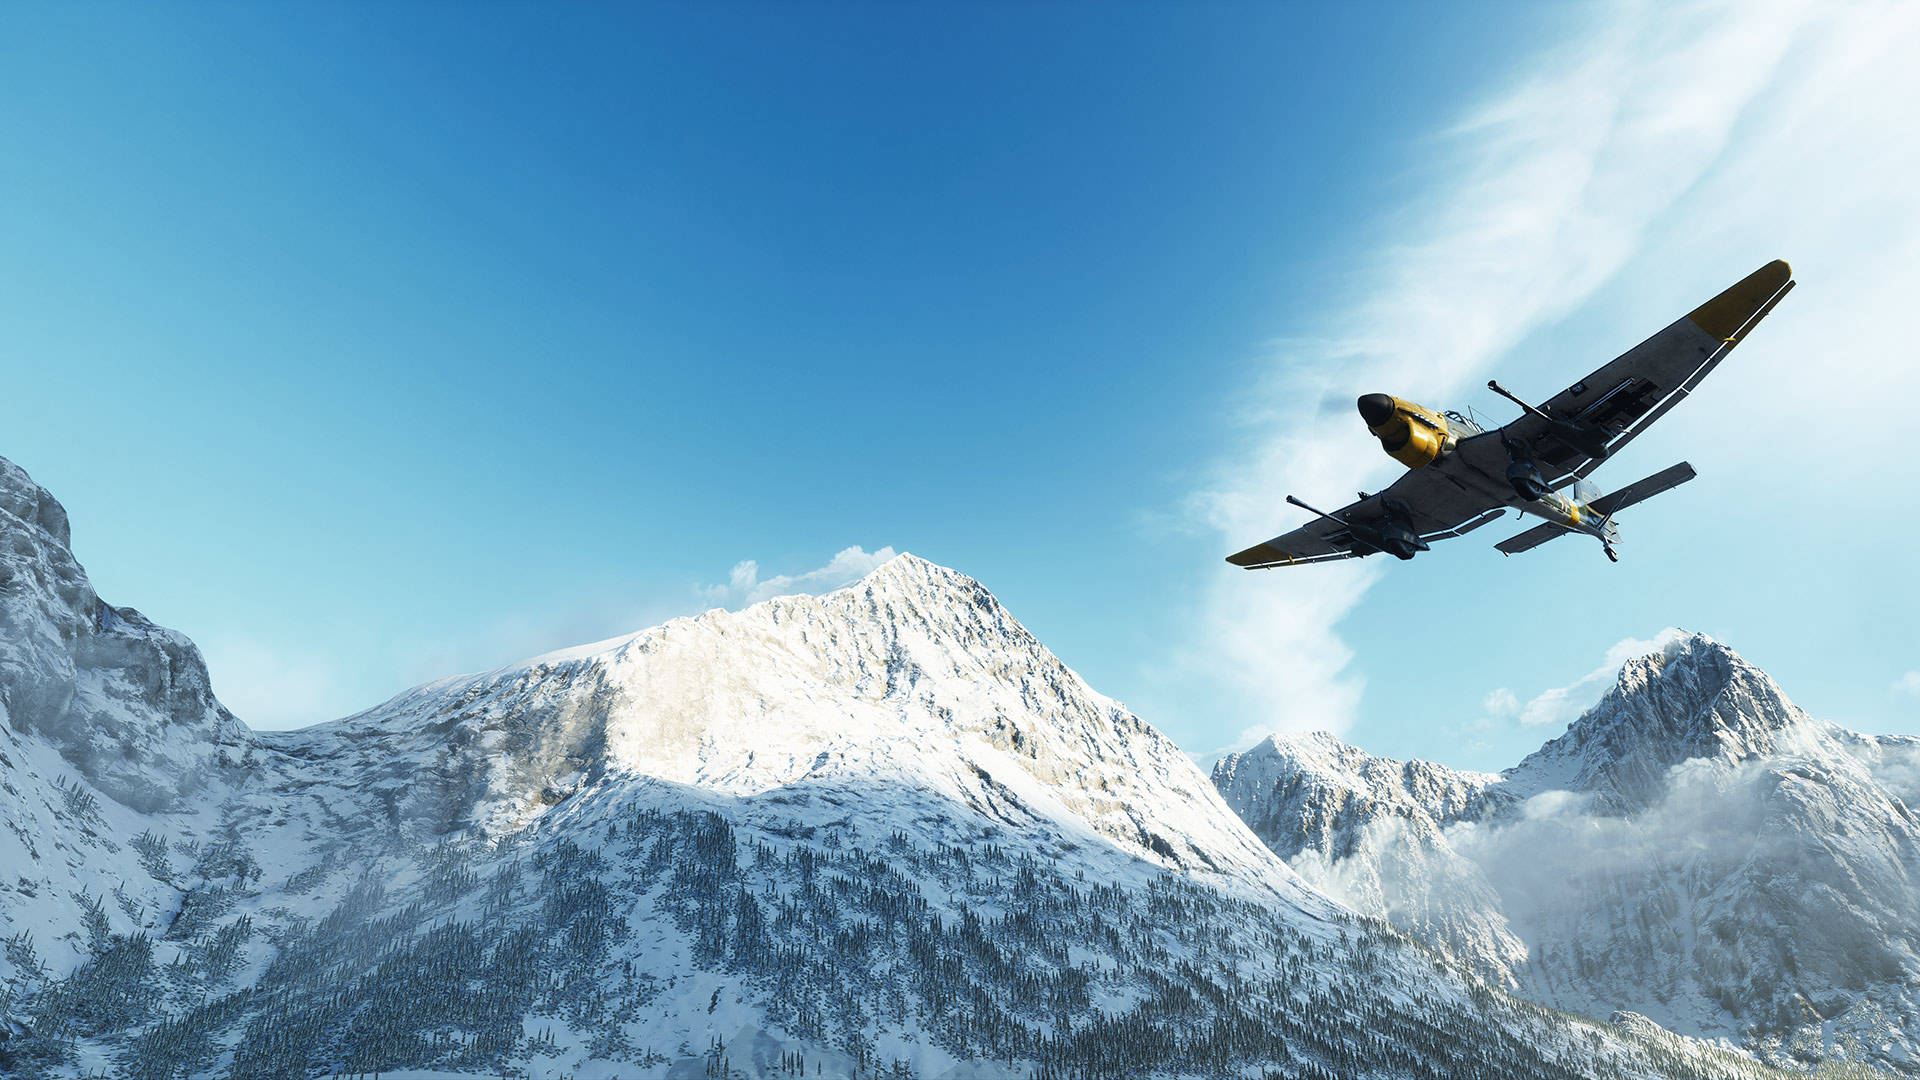 Rocket Flying Over Mountains Wallpapers